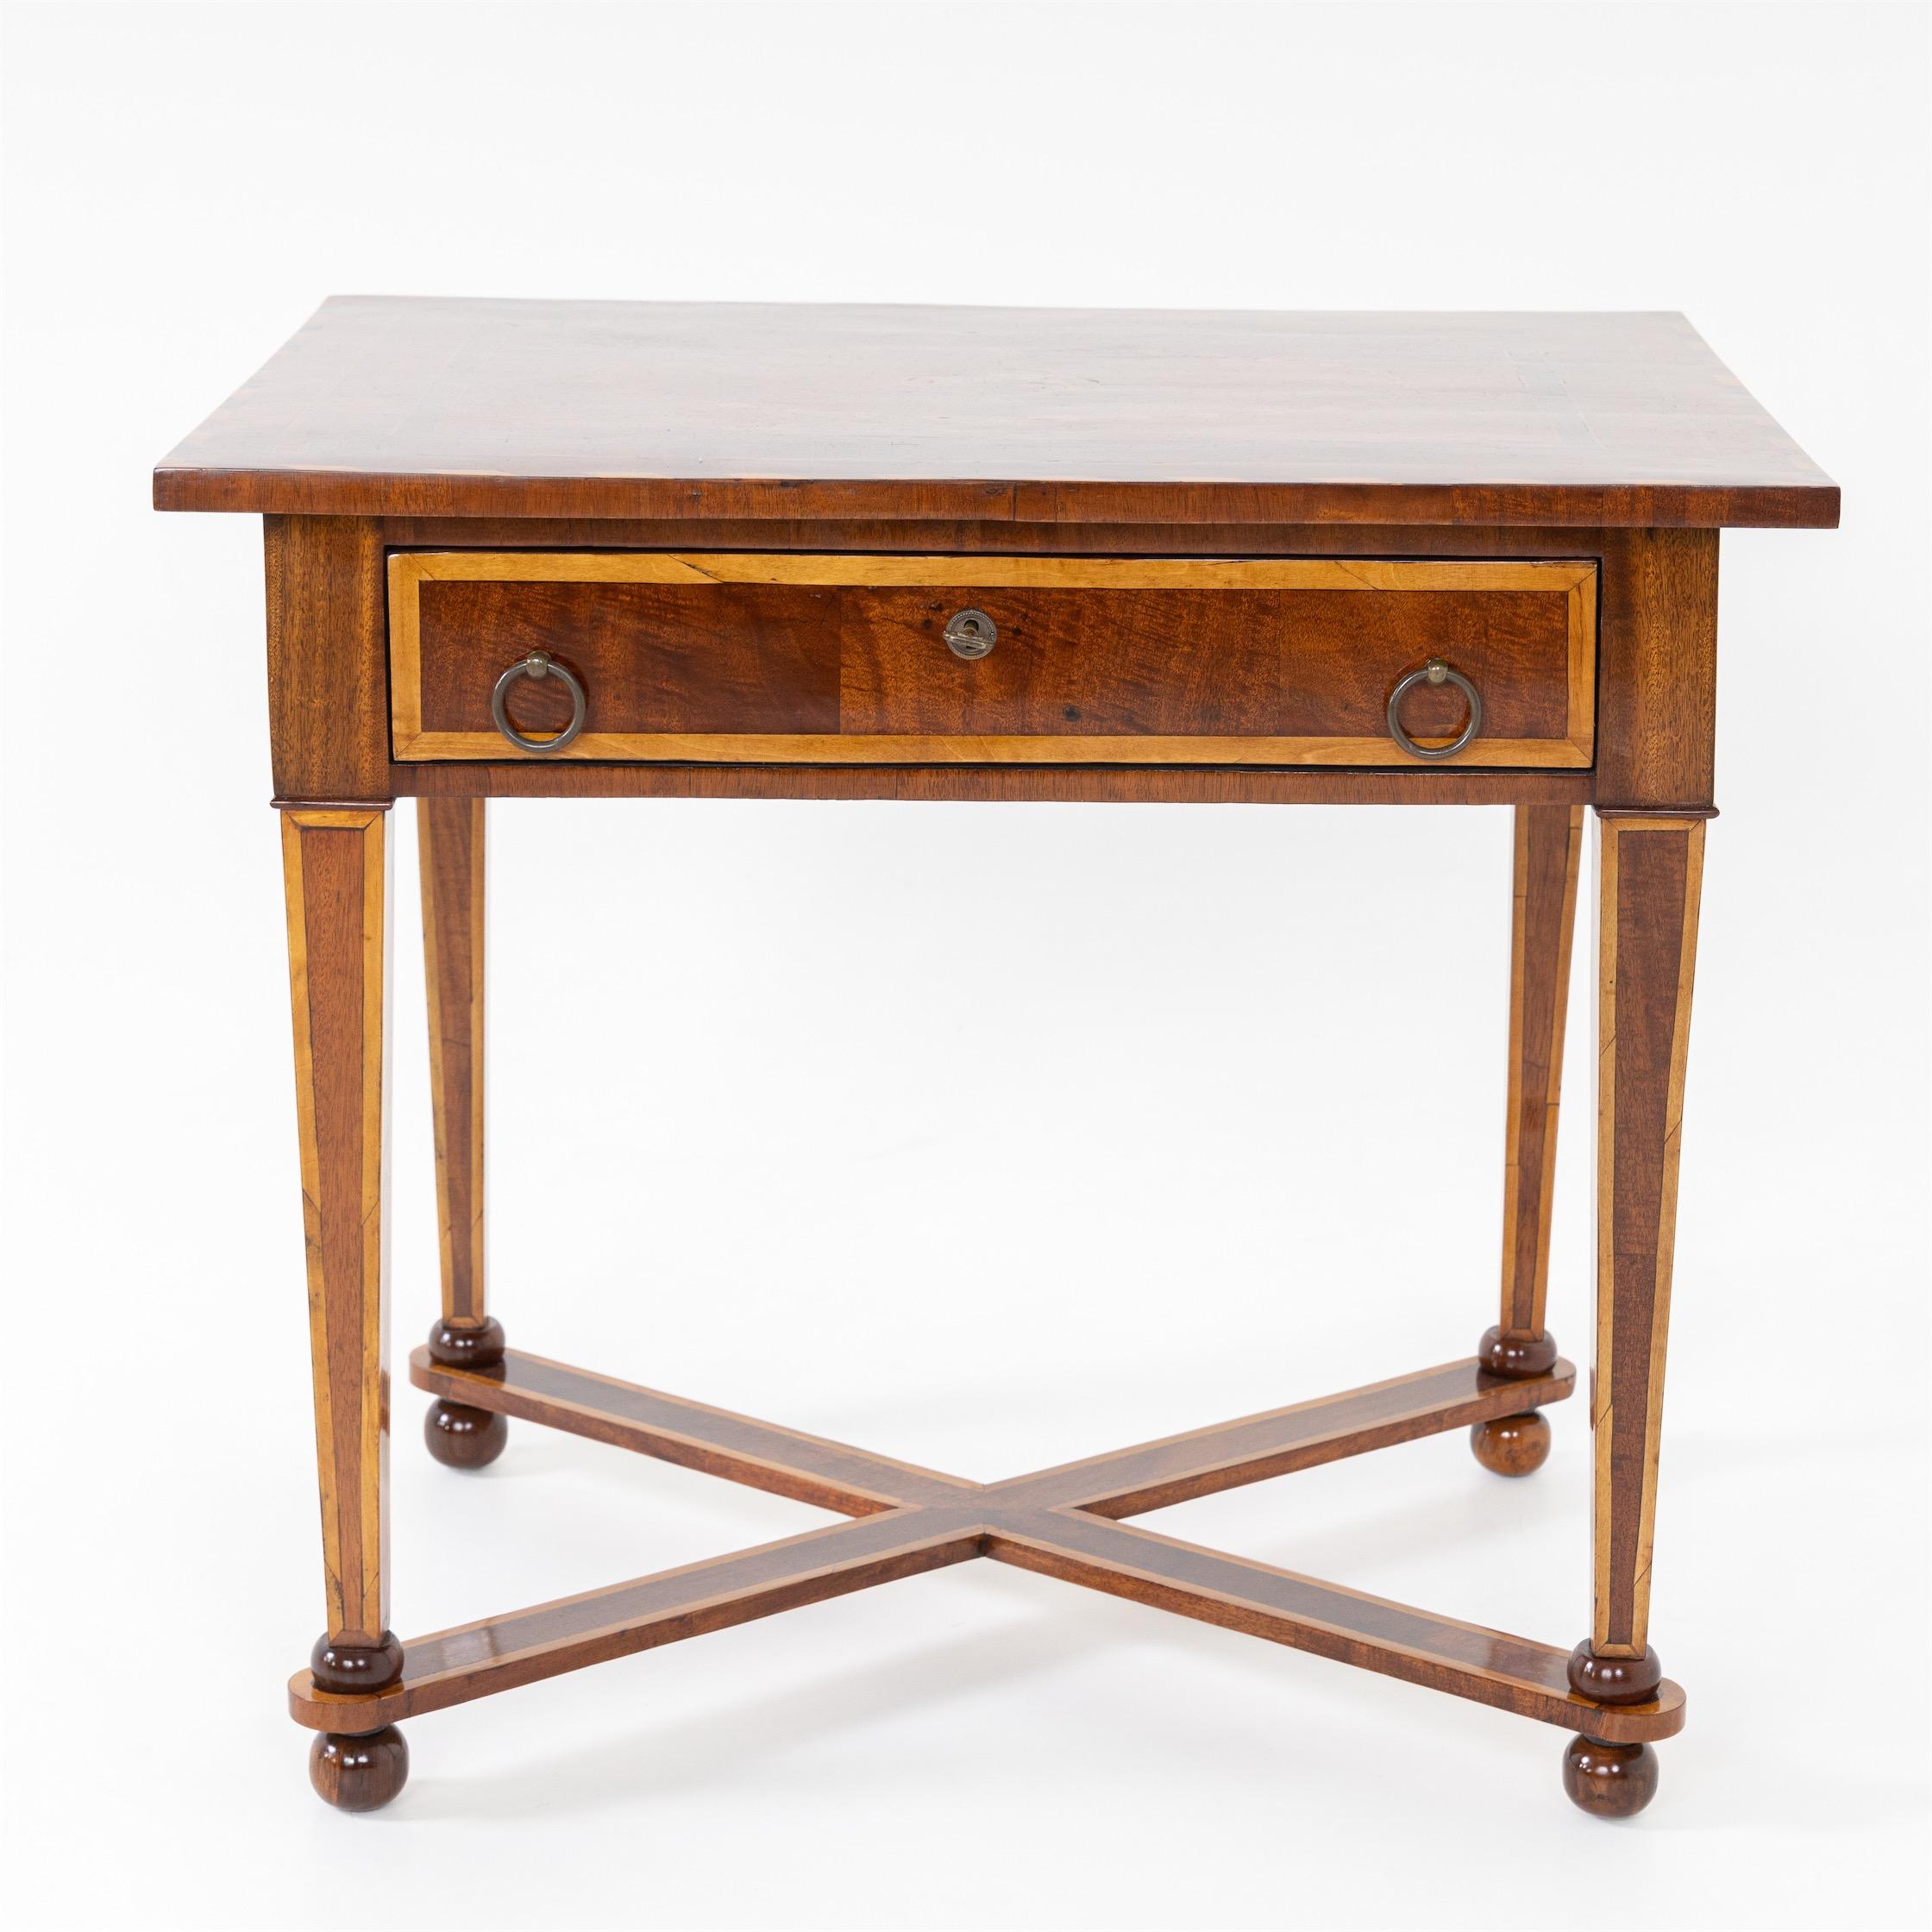 Neoclassical Table, France, circa 1800